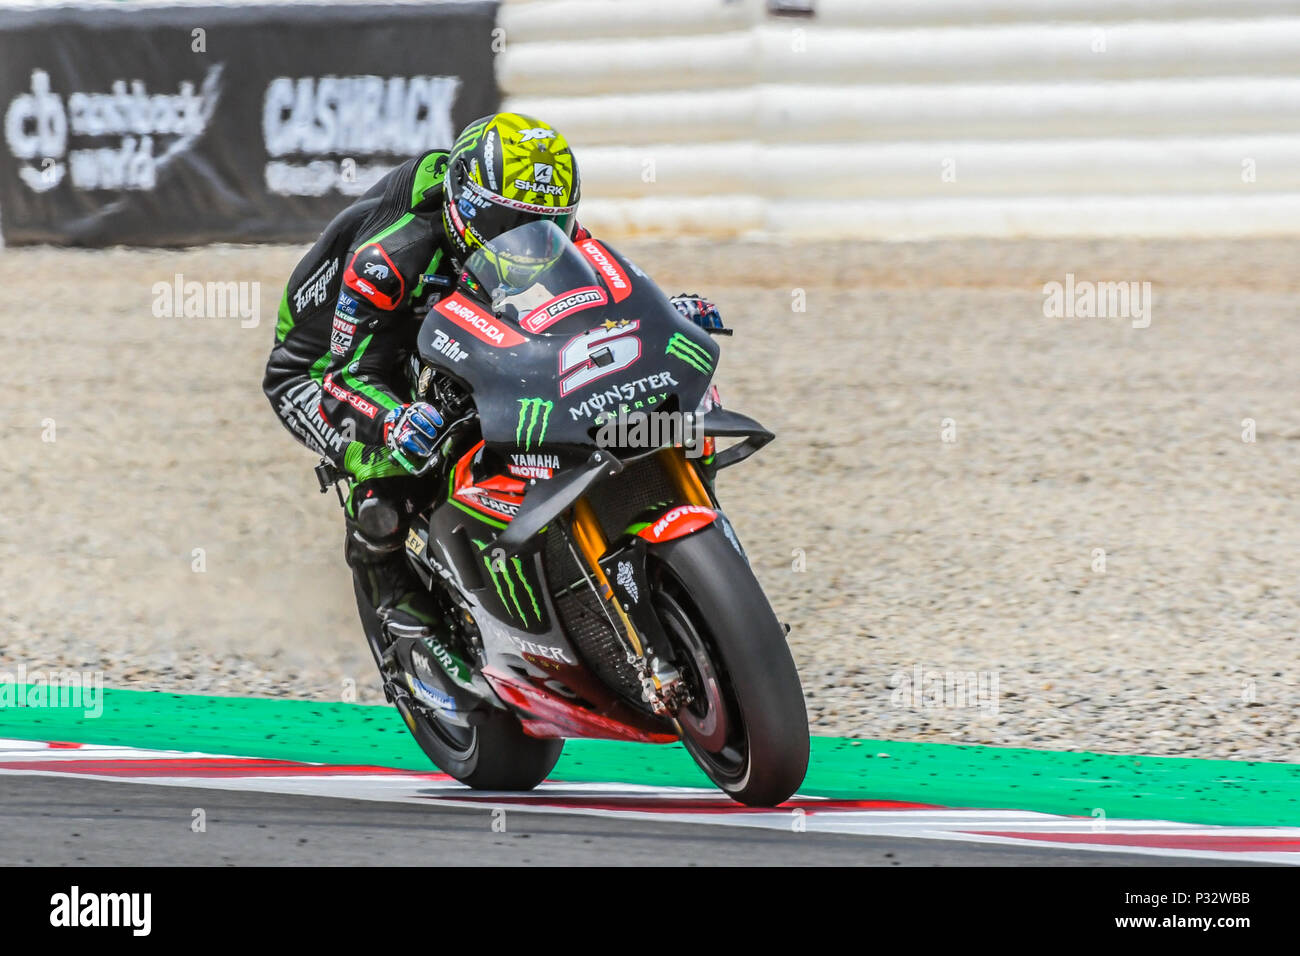 JOHANN ZARCO (5) of France during the MotoGP race of the race of the  Catalunya Grand